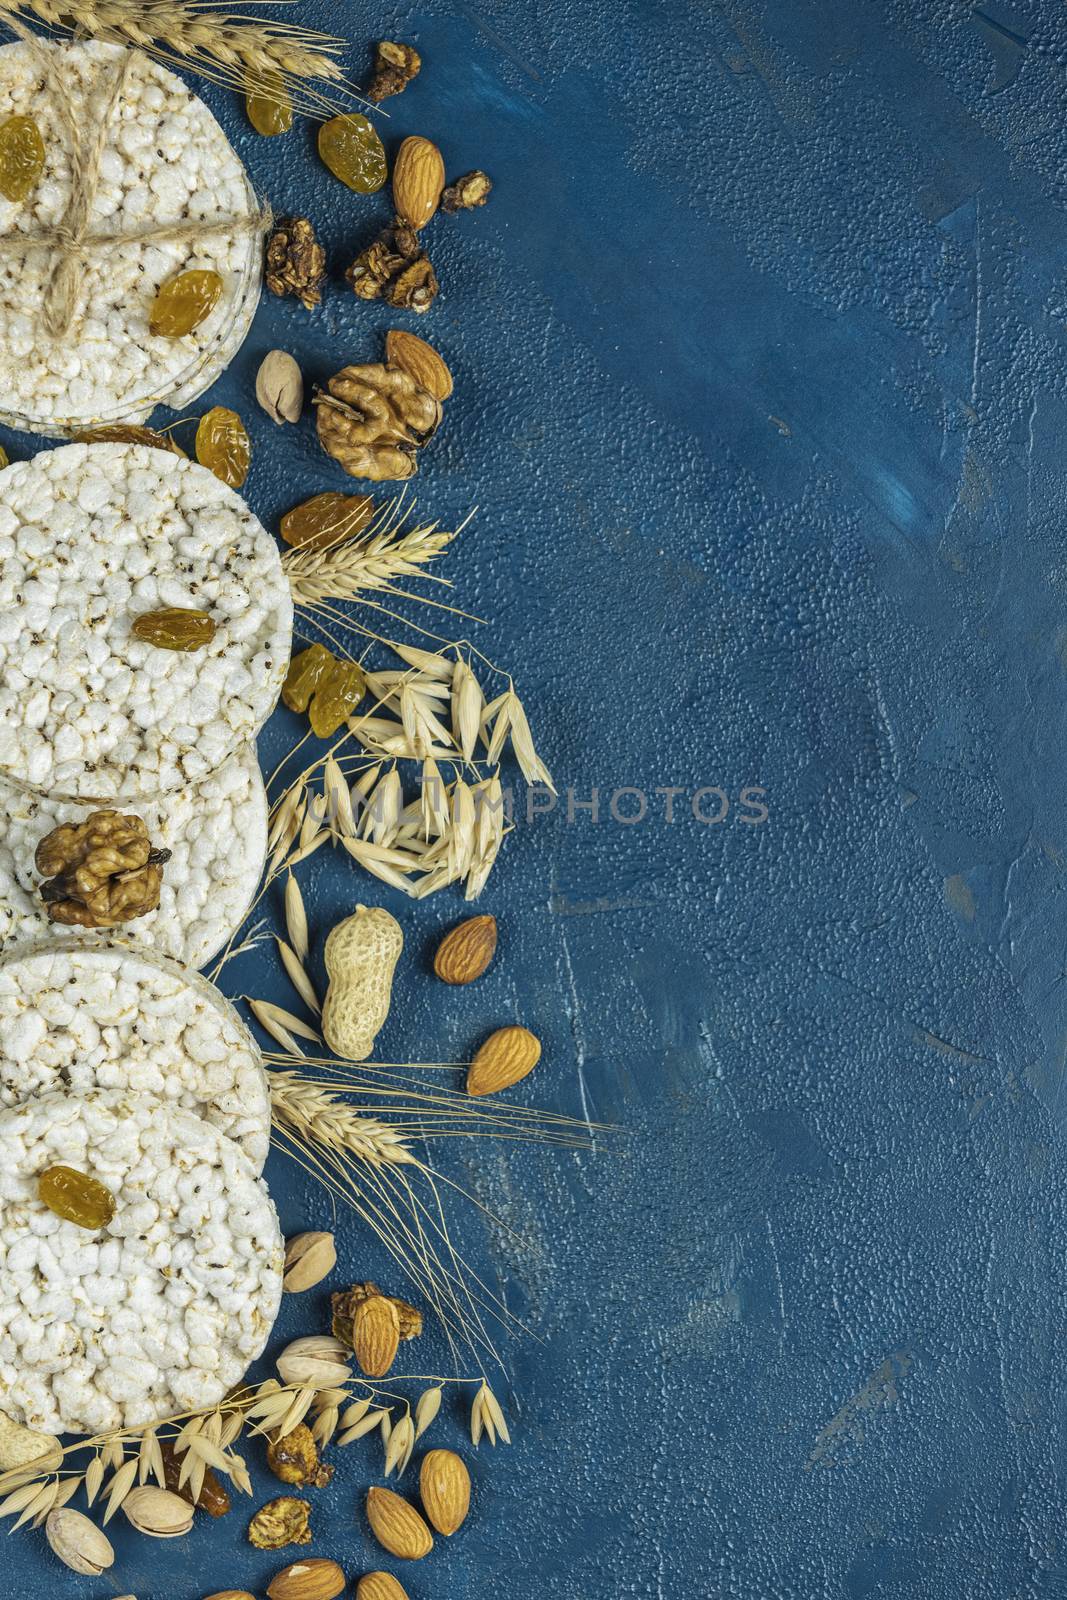 American puffed rice cakes. Healthy snacks with ears of wheat on by ArtSvitlyna